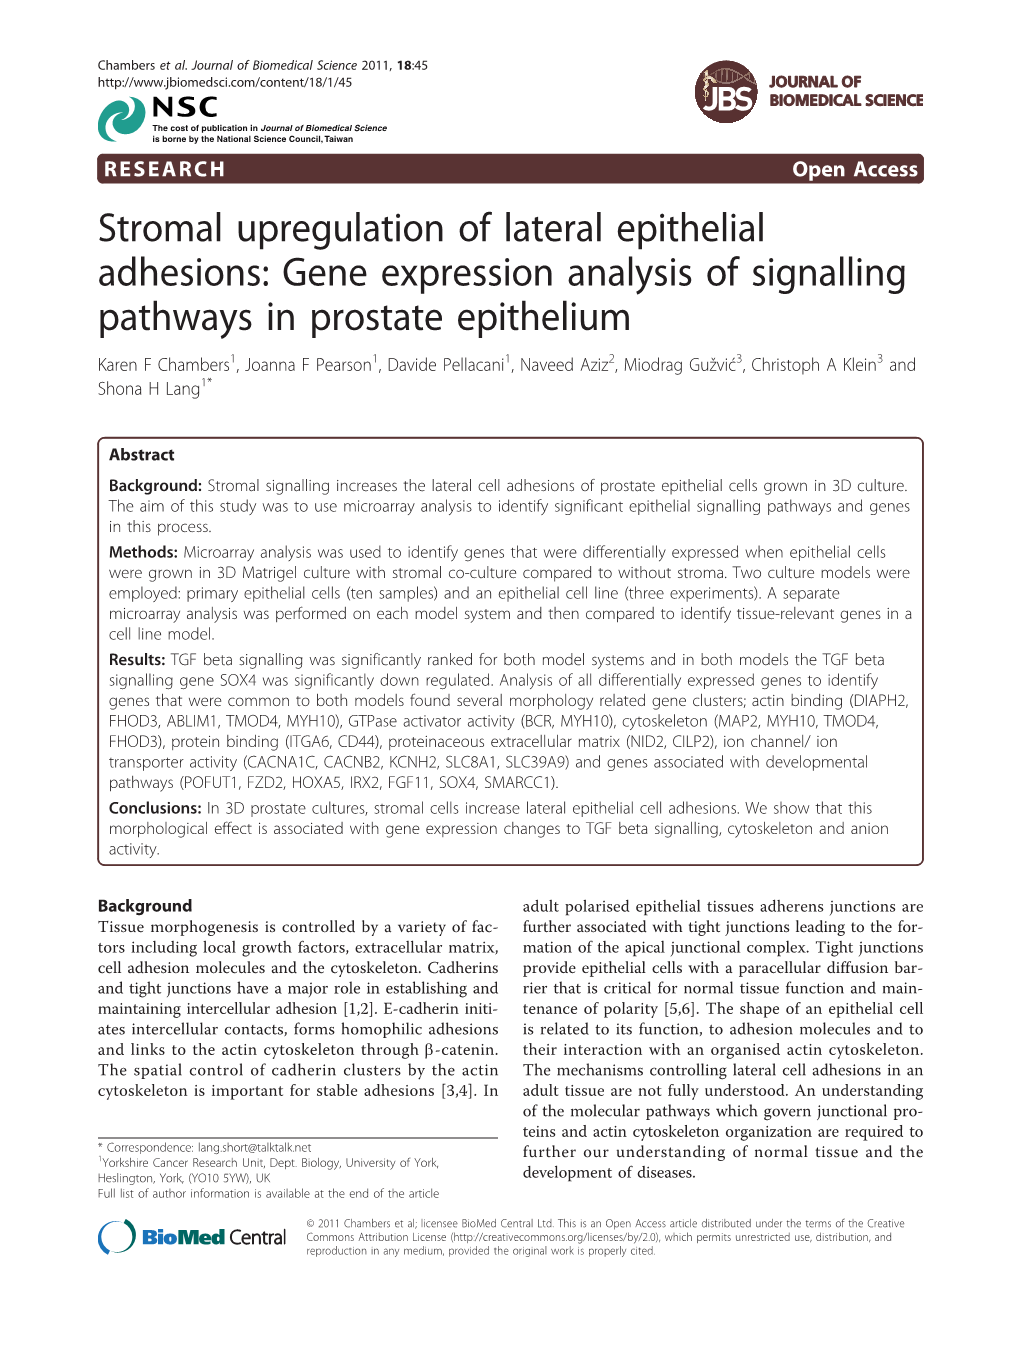 Stromal Upregulation of Lateral Epithelial Adhesions: Gene